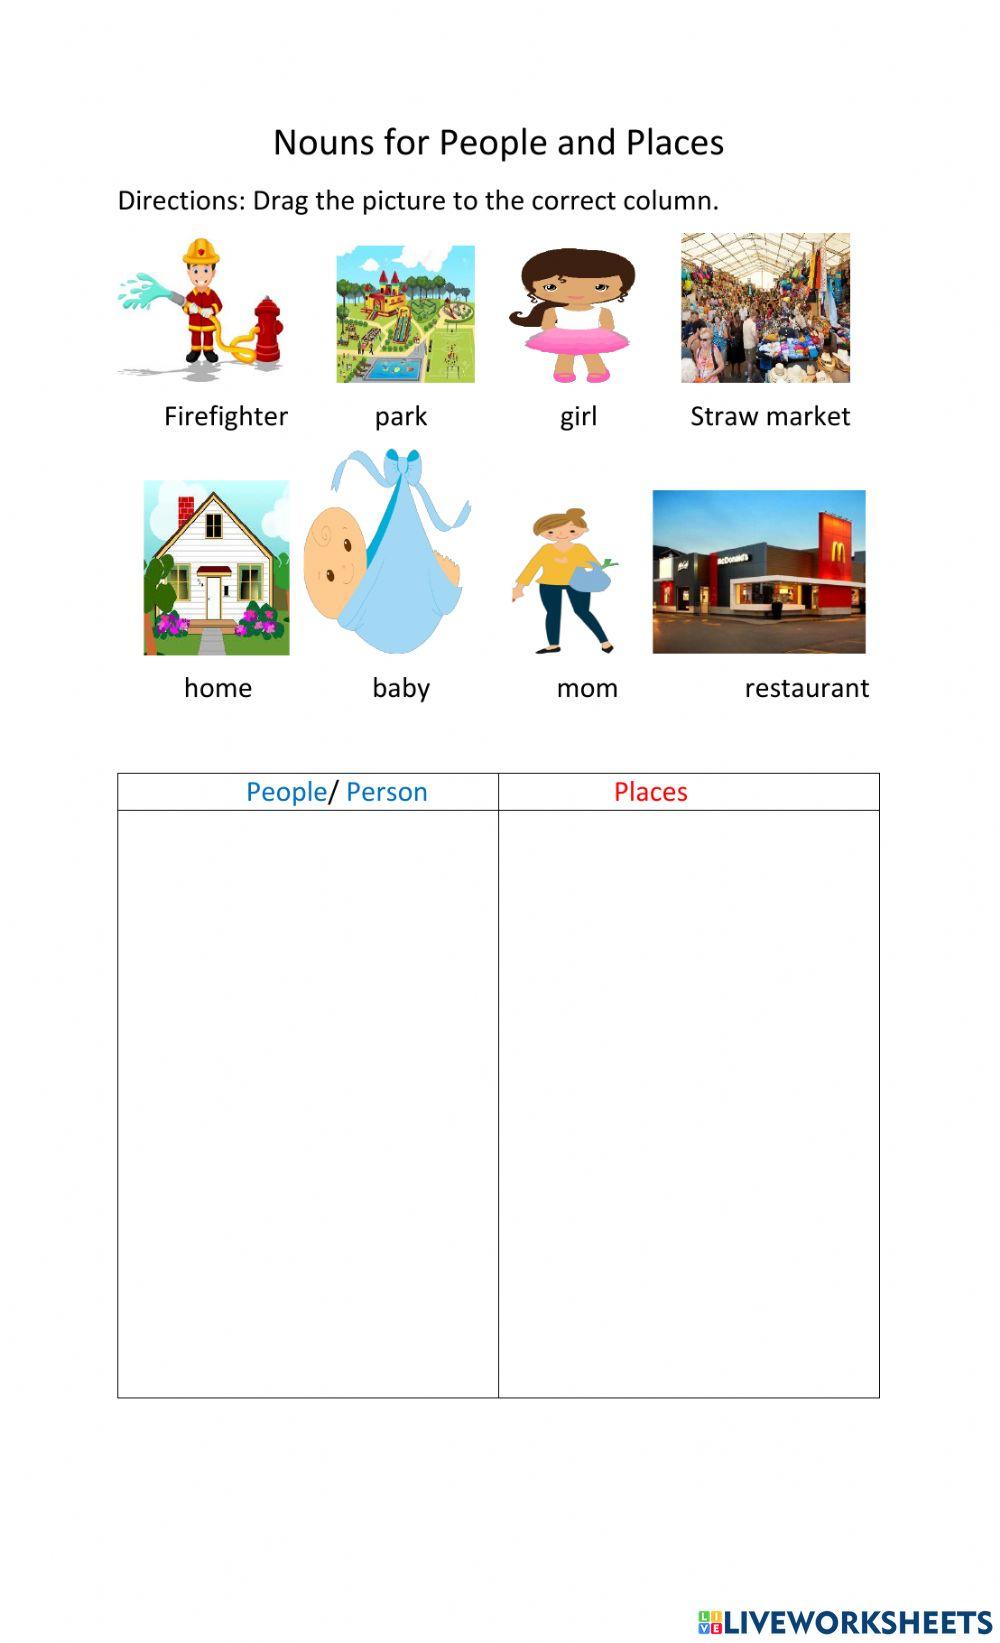 Nouns for People and Places